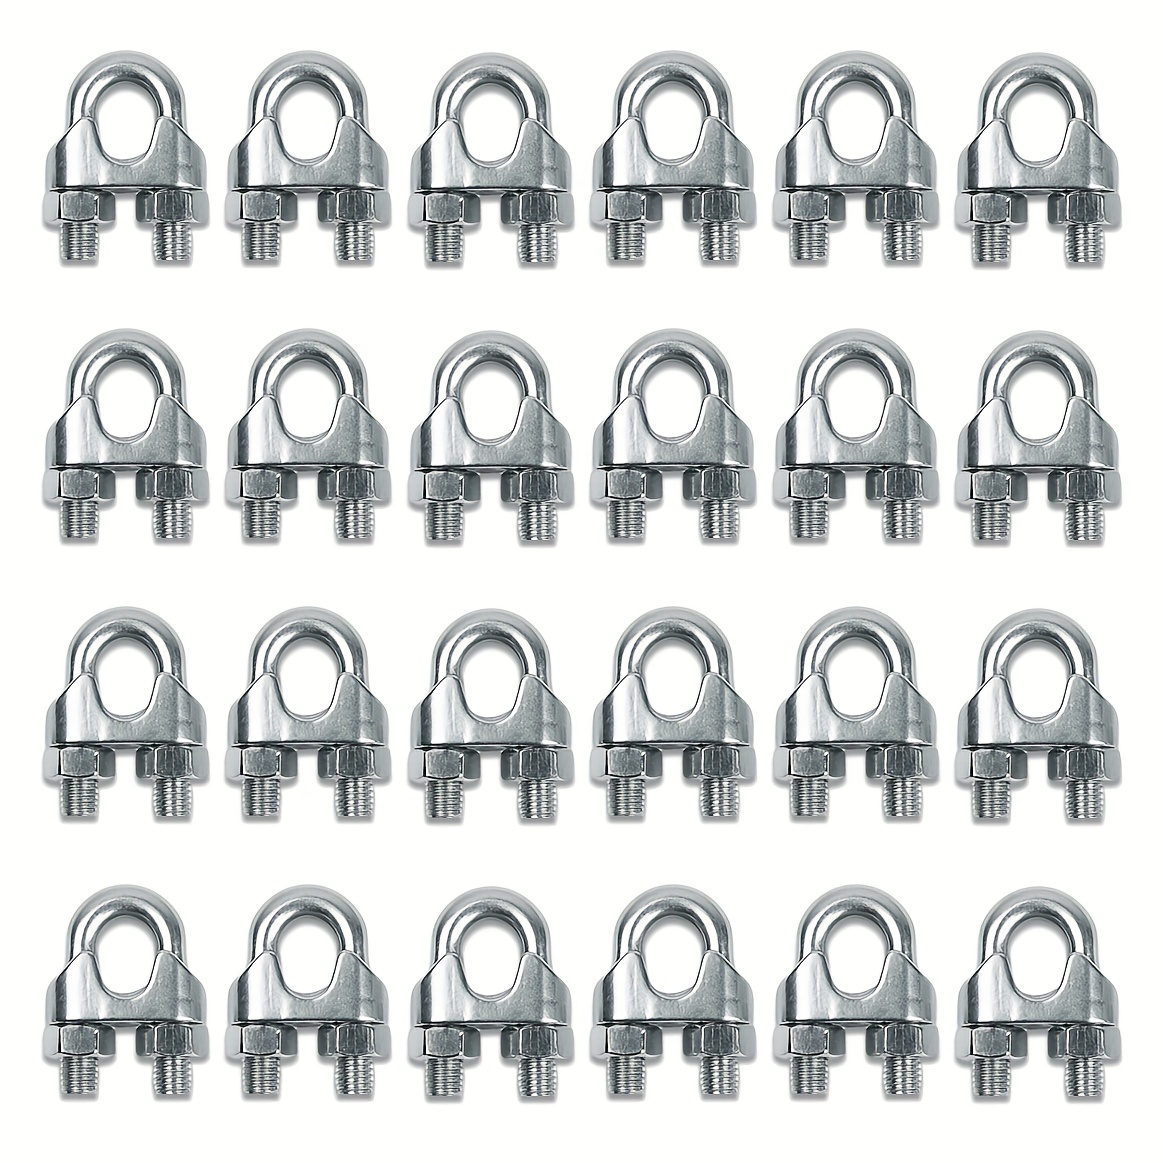 20Pcs Trailer Frame Wire Clips Solar Panel Wire Clips 304